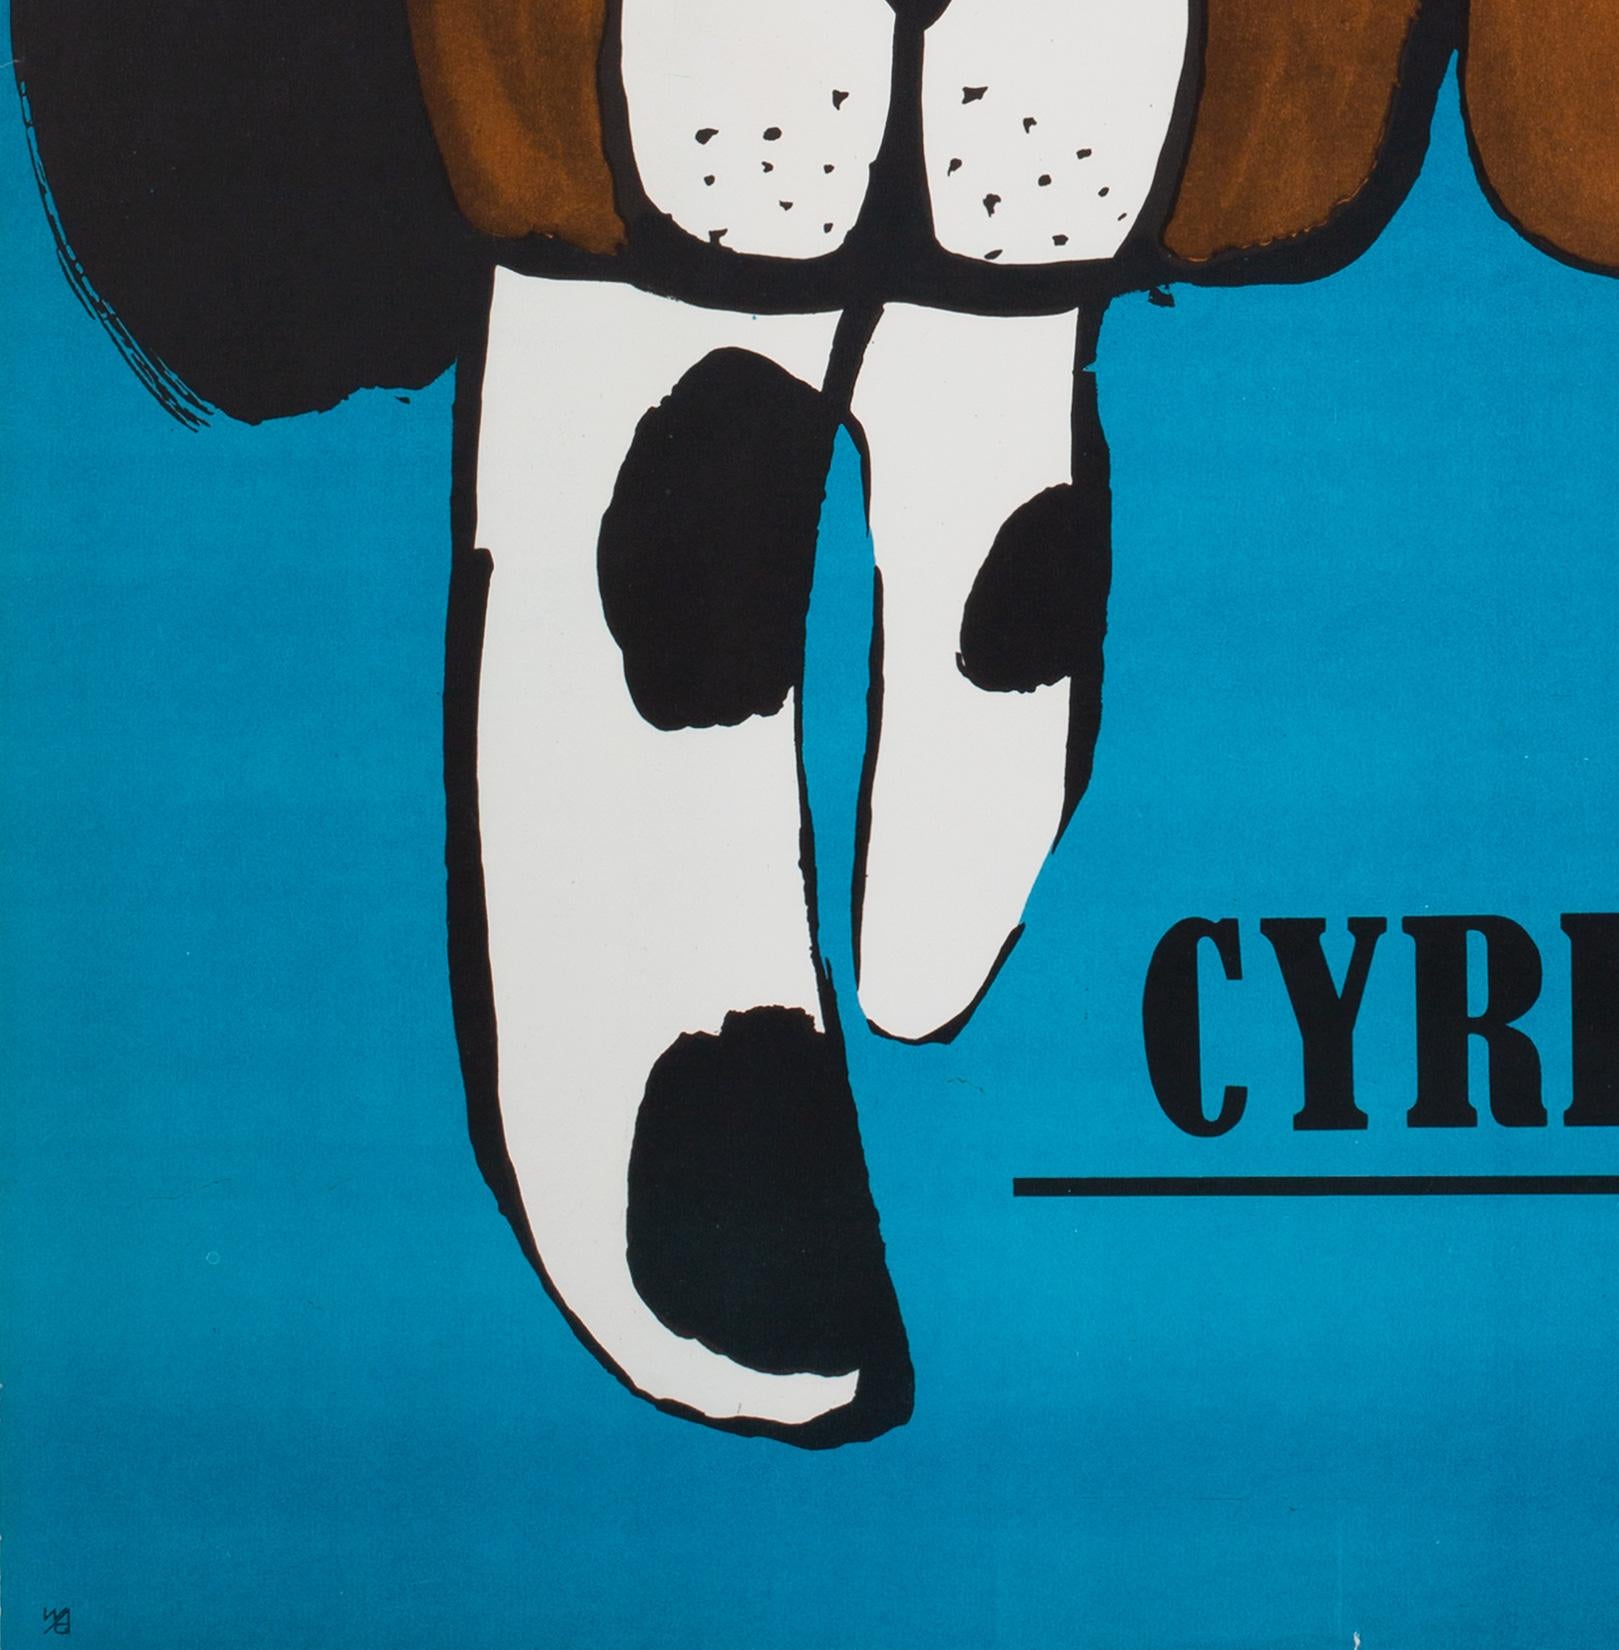 Cyrk Three Basset Hounds Polish B1 Circus Poster, Cieslewicz R1970s In Excellent Condition For Sale In Bath, Somerset